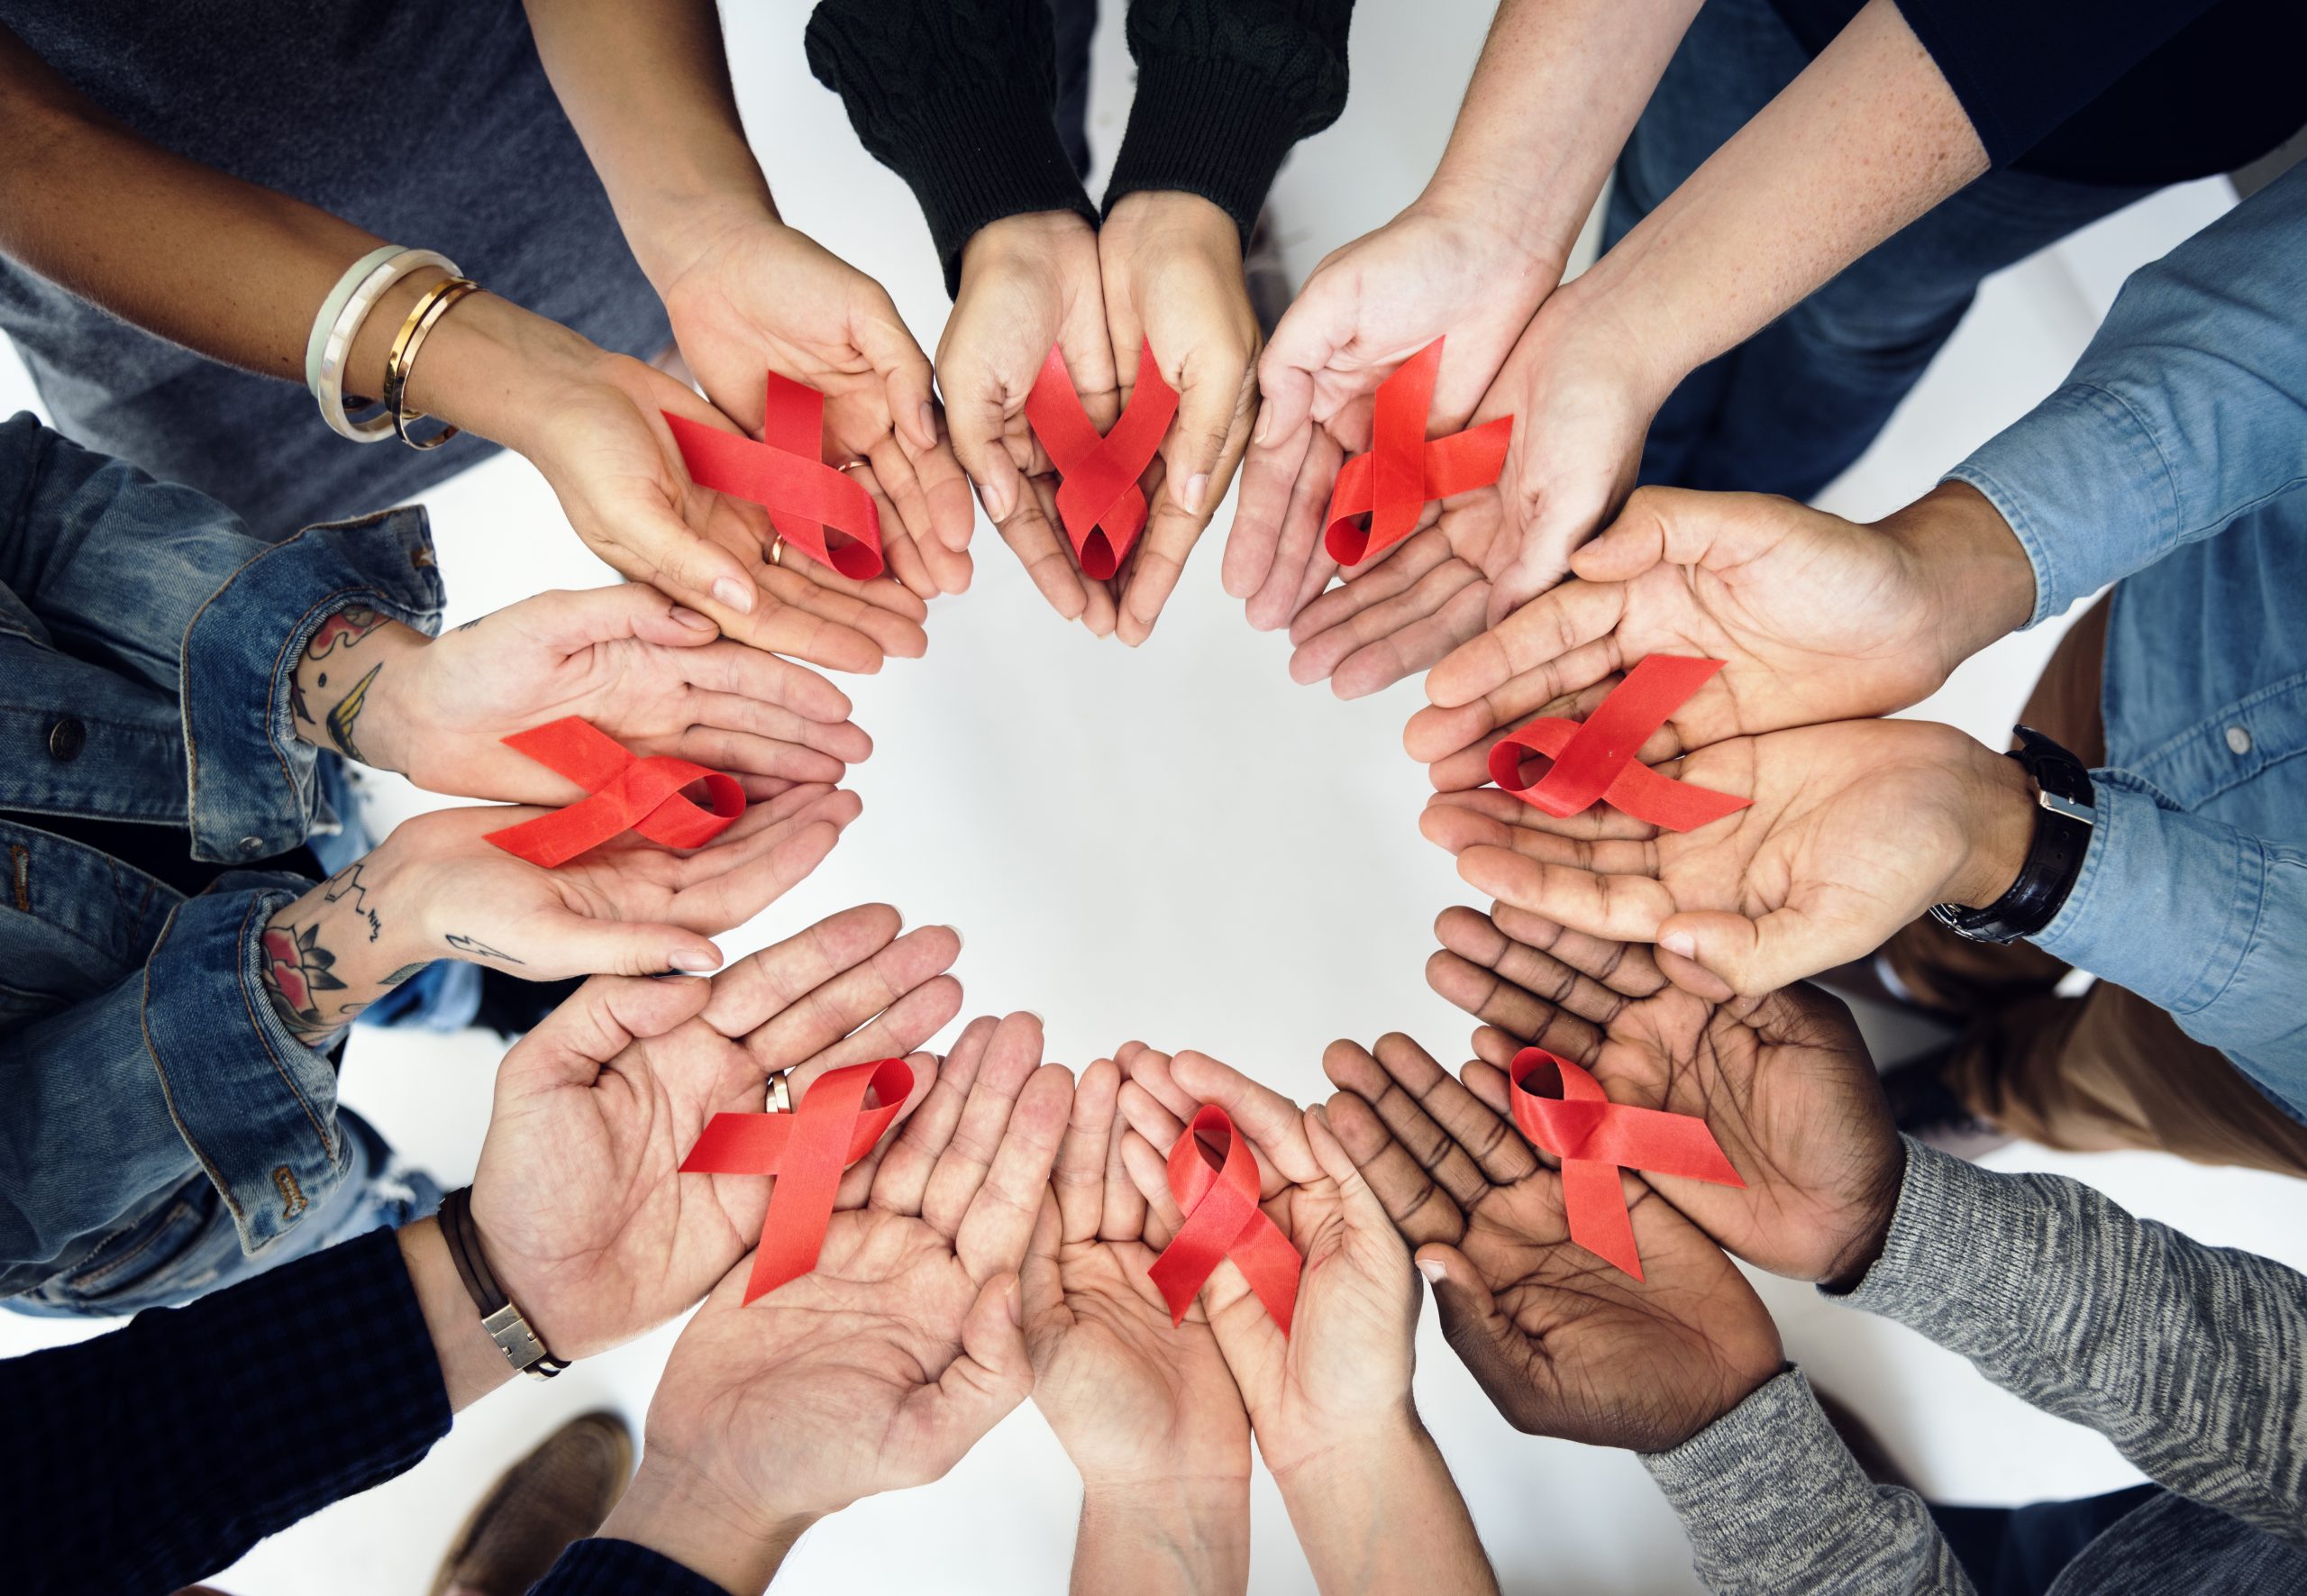 Group,Of,Hands,Holding,Red,Ribbon,Stop,Drugs,And,Hiv/aids